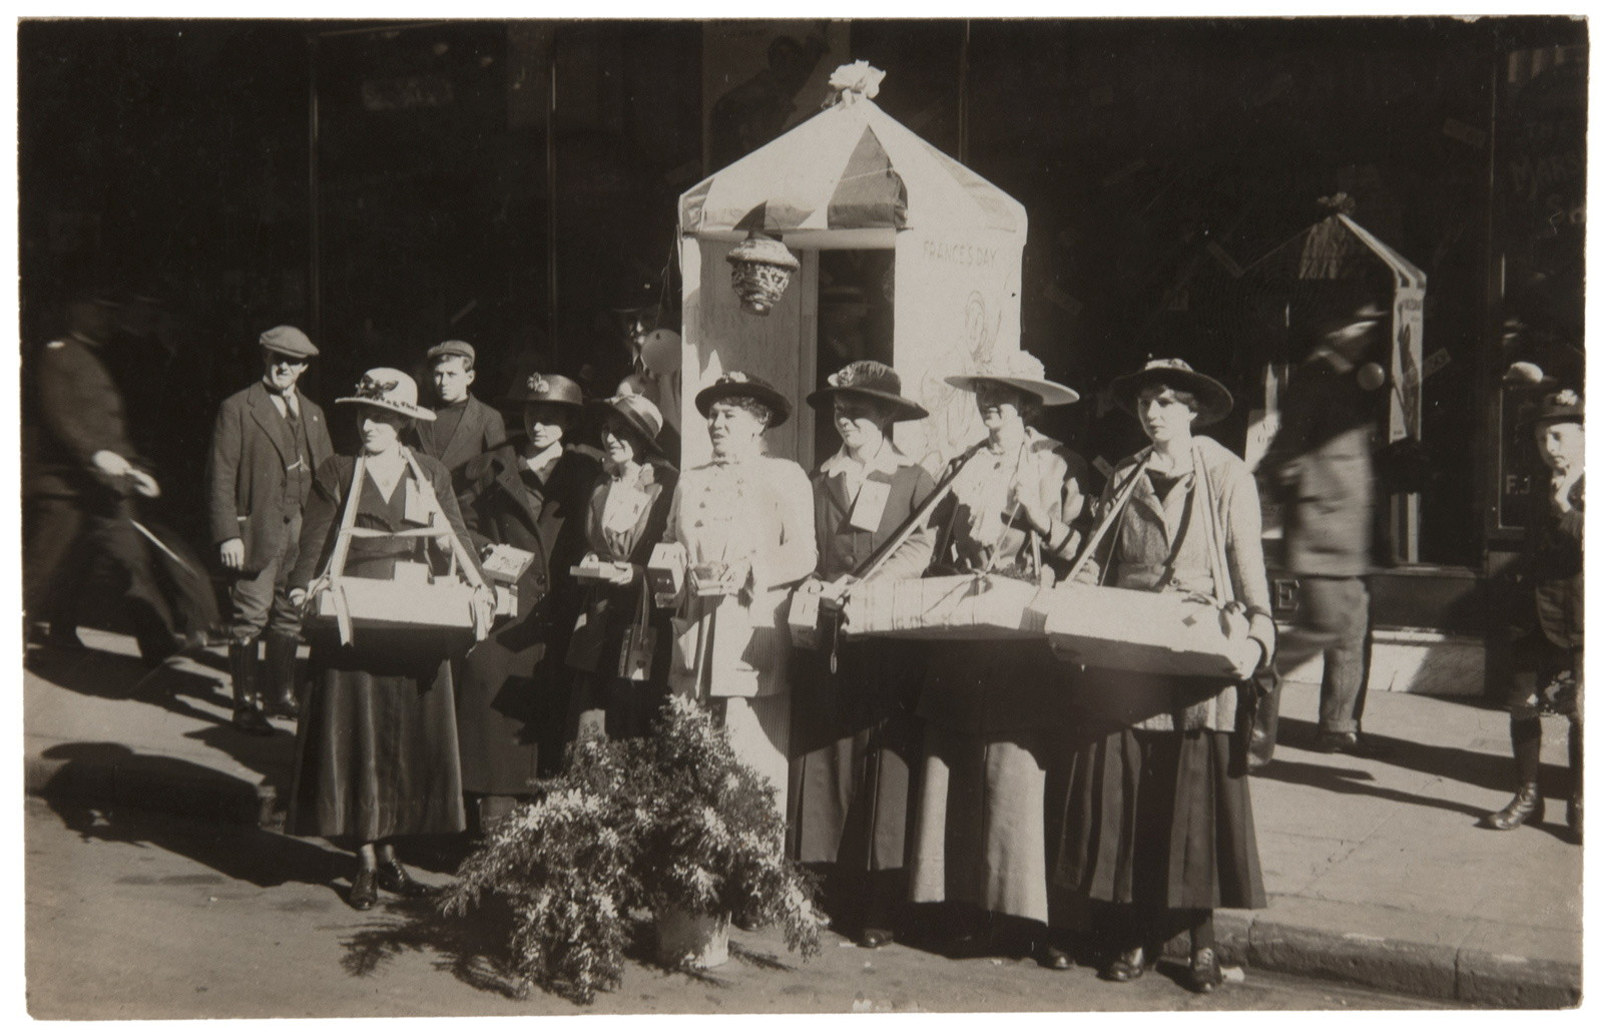 Women collectors on a city street in Sydney during World War 1, fundraising for France's Day, 14 July 1917